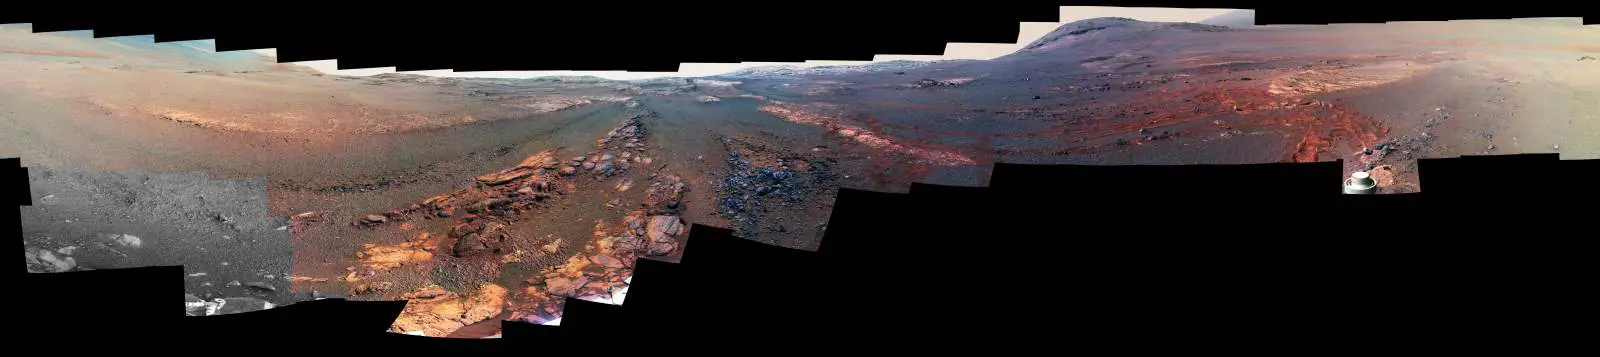 Opportunity Parting Mars Panorama